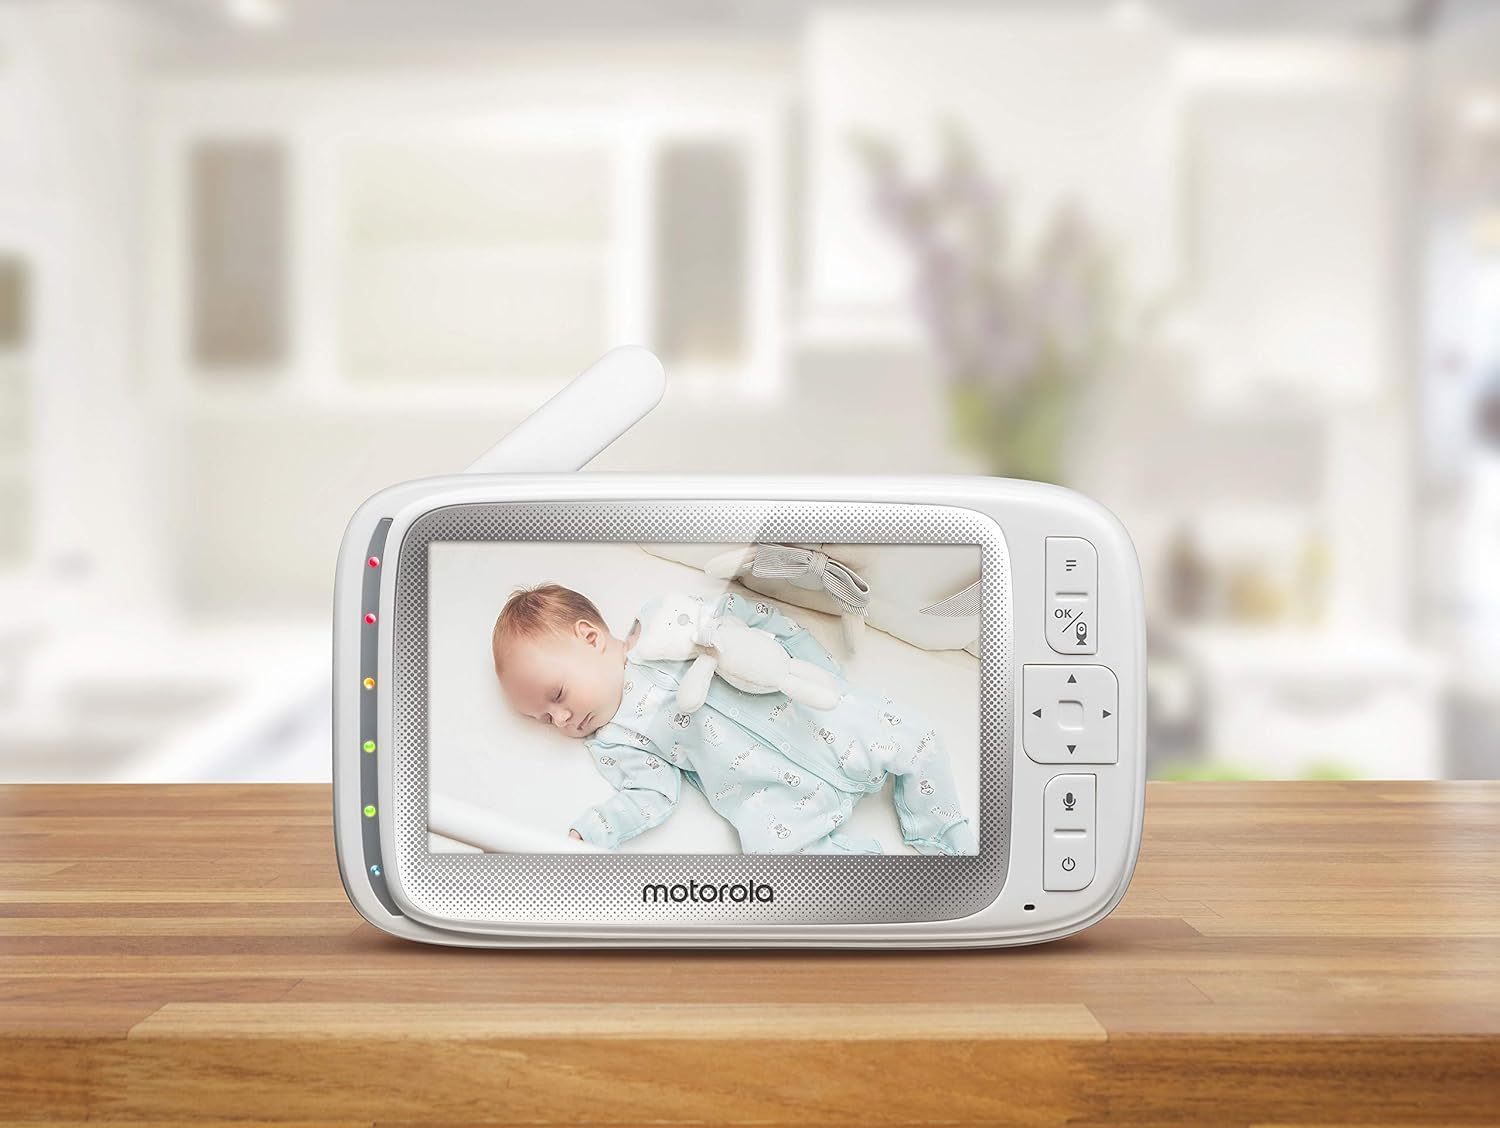 Motorola Connect40 Video Baby Monitor - 5" Parent Unit and HD Wi-Fi Viewing for Baby, Elderly, Pet - 2-Way Audio, Night Vision, Temp Sensor, Remote Pan/Digital Zoom